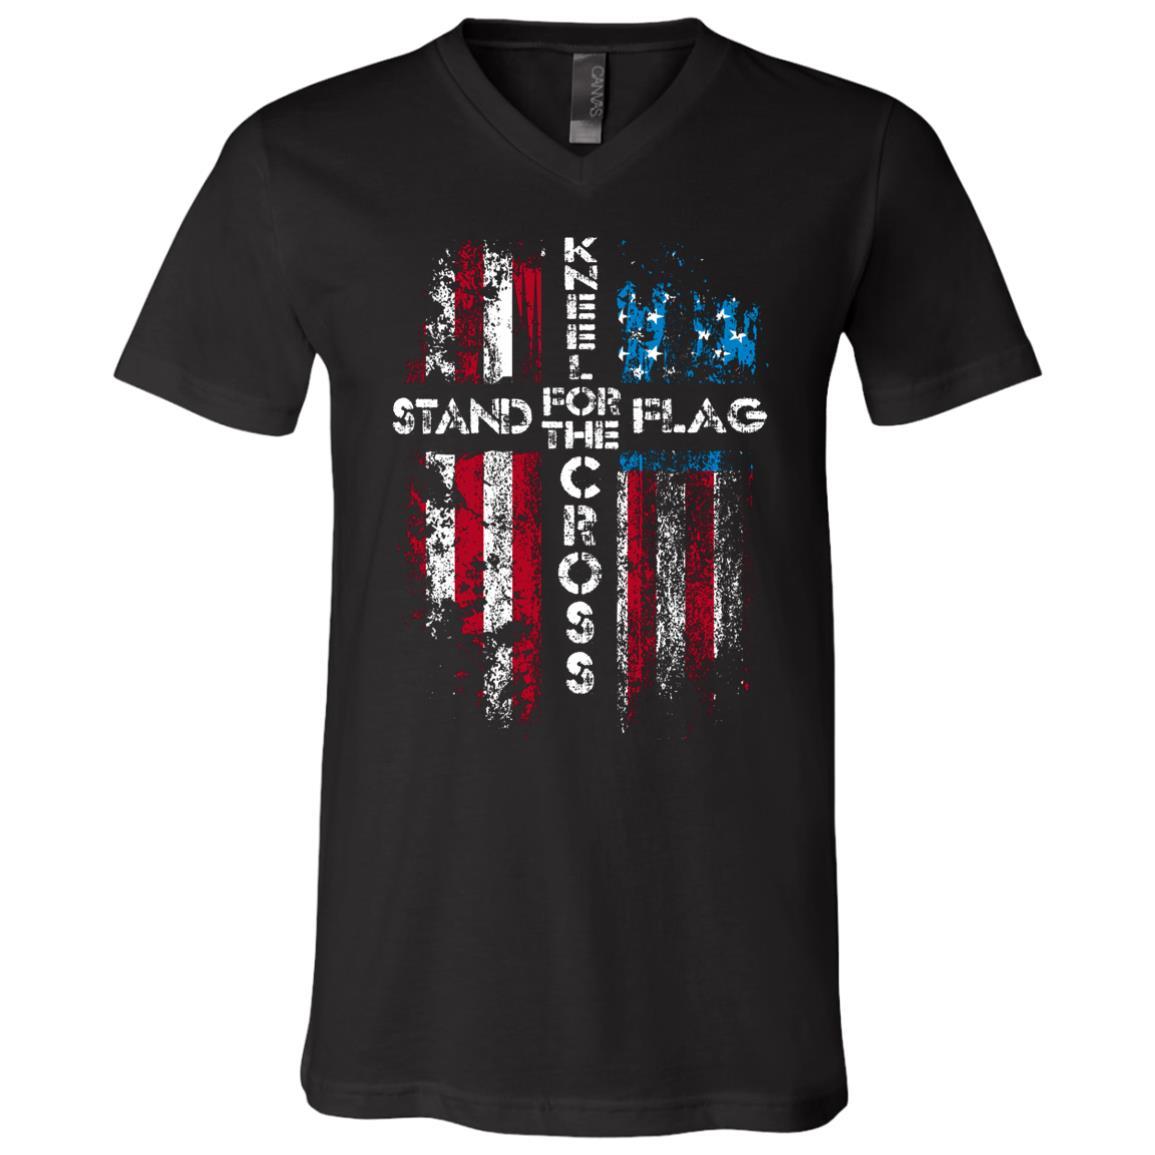 Stand For The Flag Kneel For The Cross Shirt Patriotic Unisex Tees - GoneBold.gift